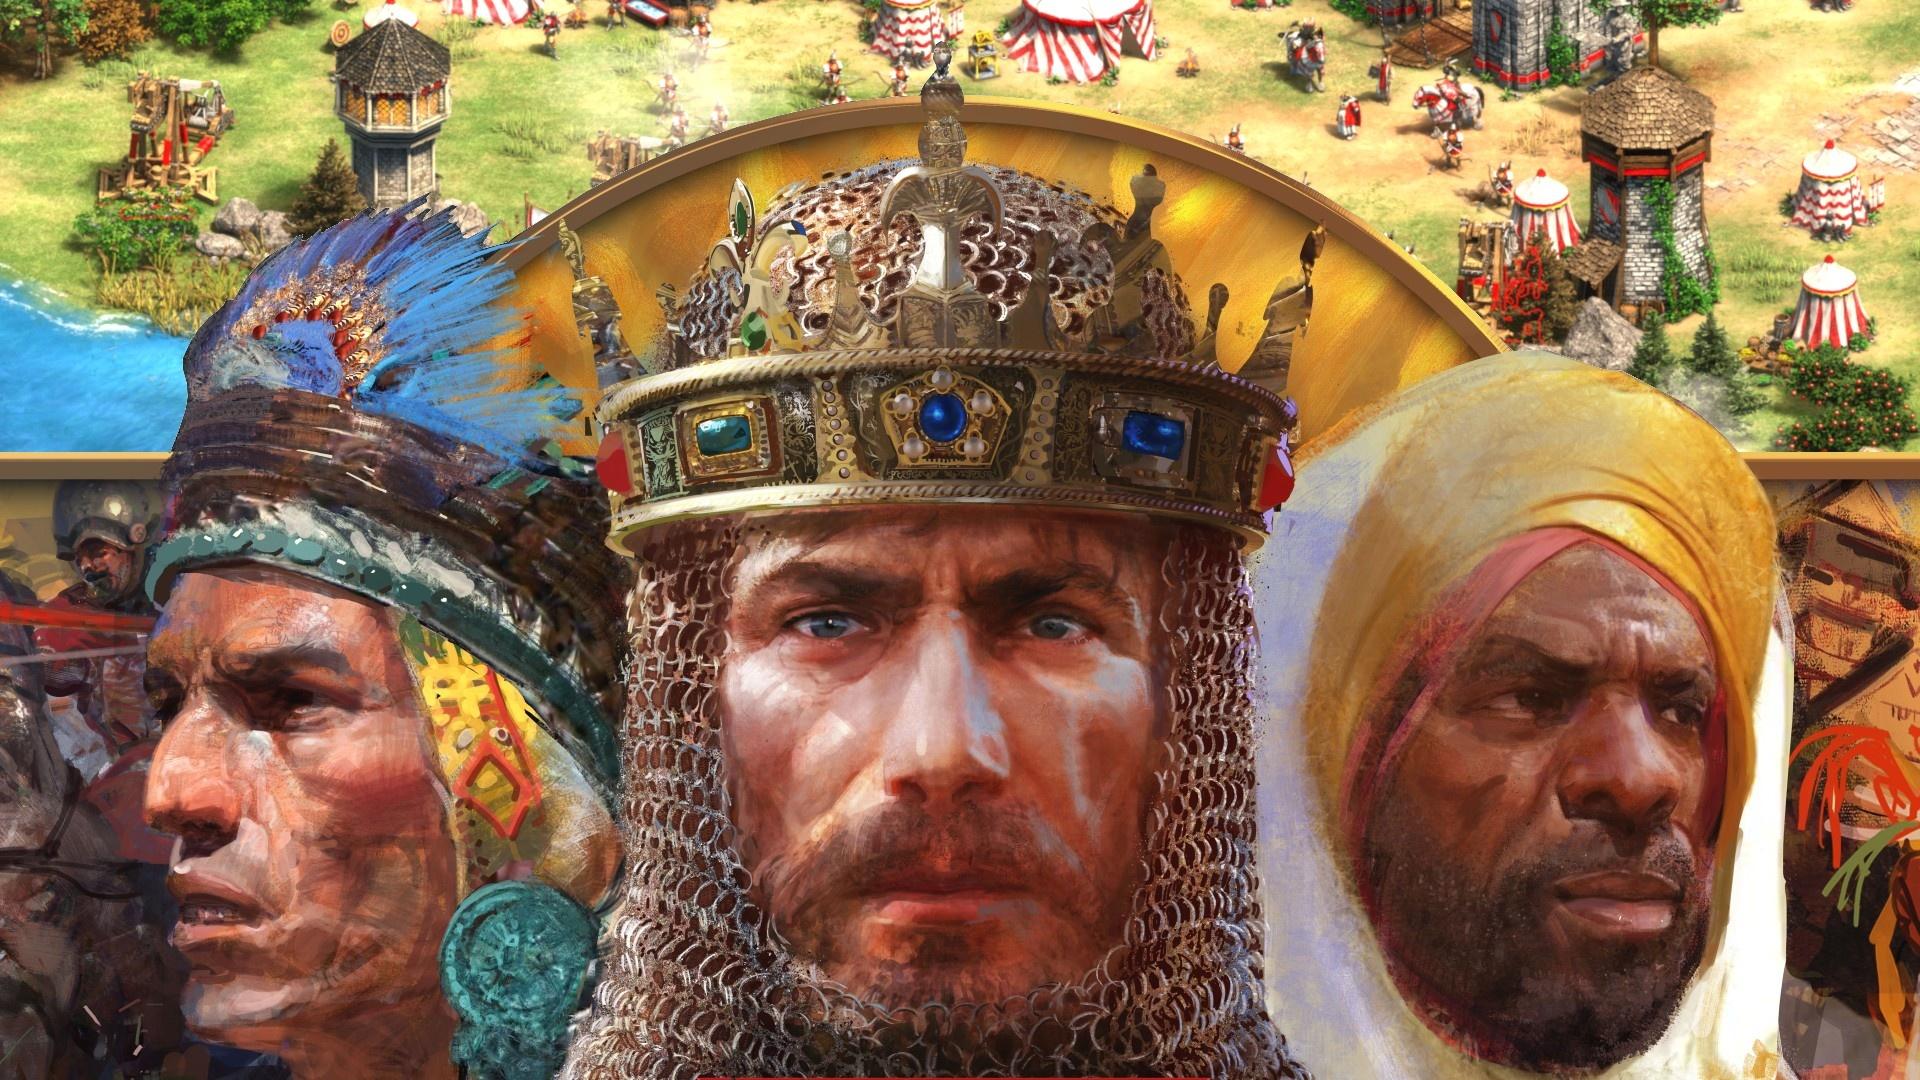 age of empires: definitive edition